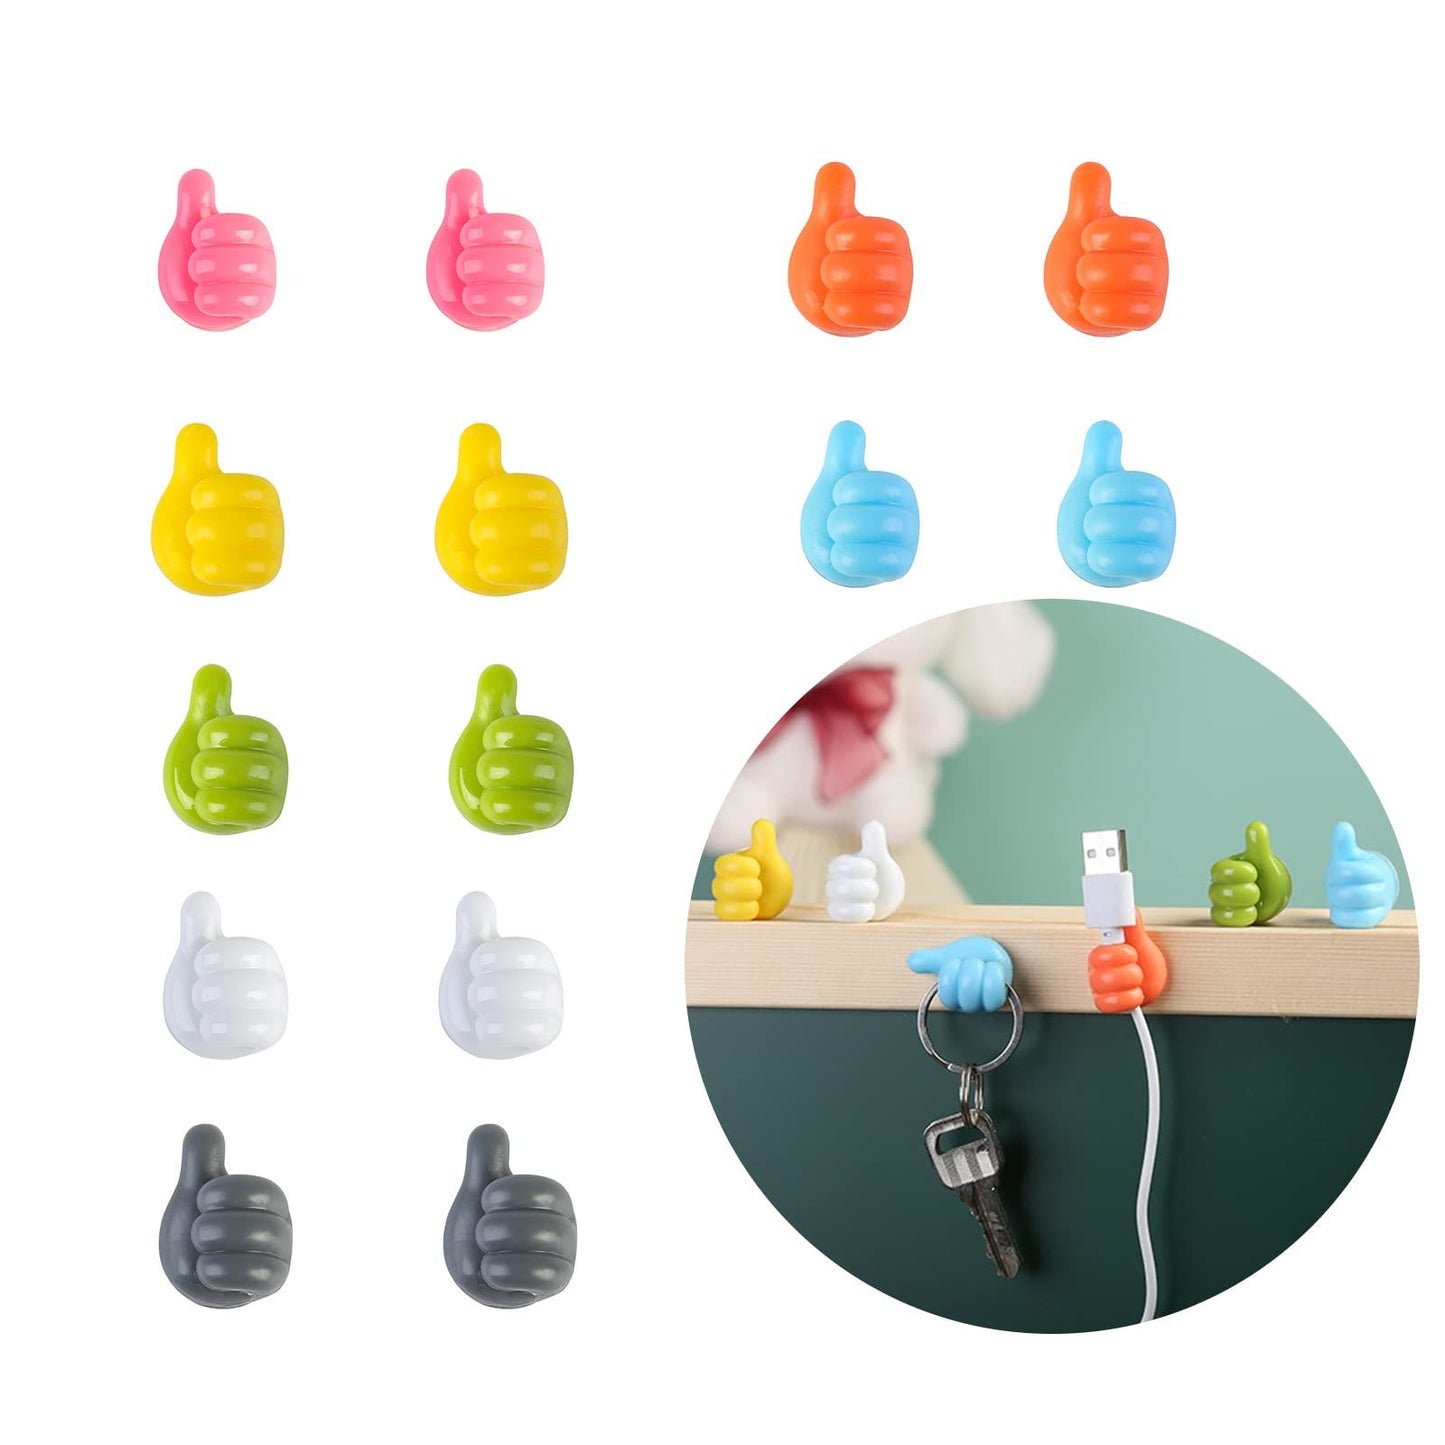 Multifunctional Clip Holder Thumb Hooks Wire Organizer Wall Hooks Hanger Strong Wall Storage Holder For Kitchen Bathroom